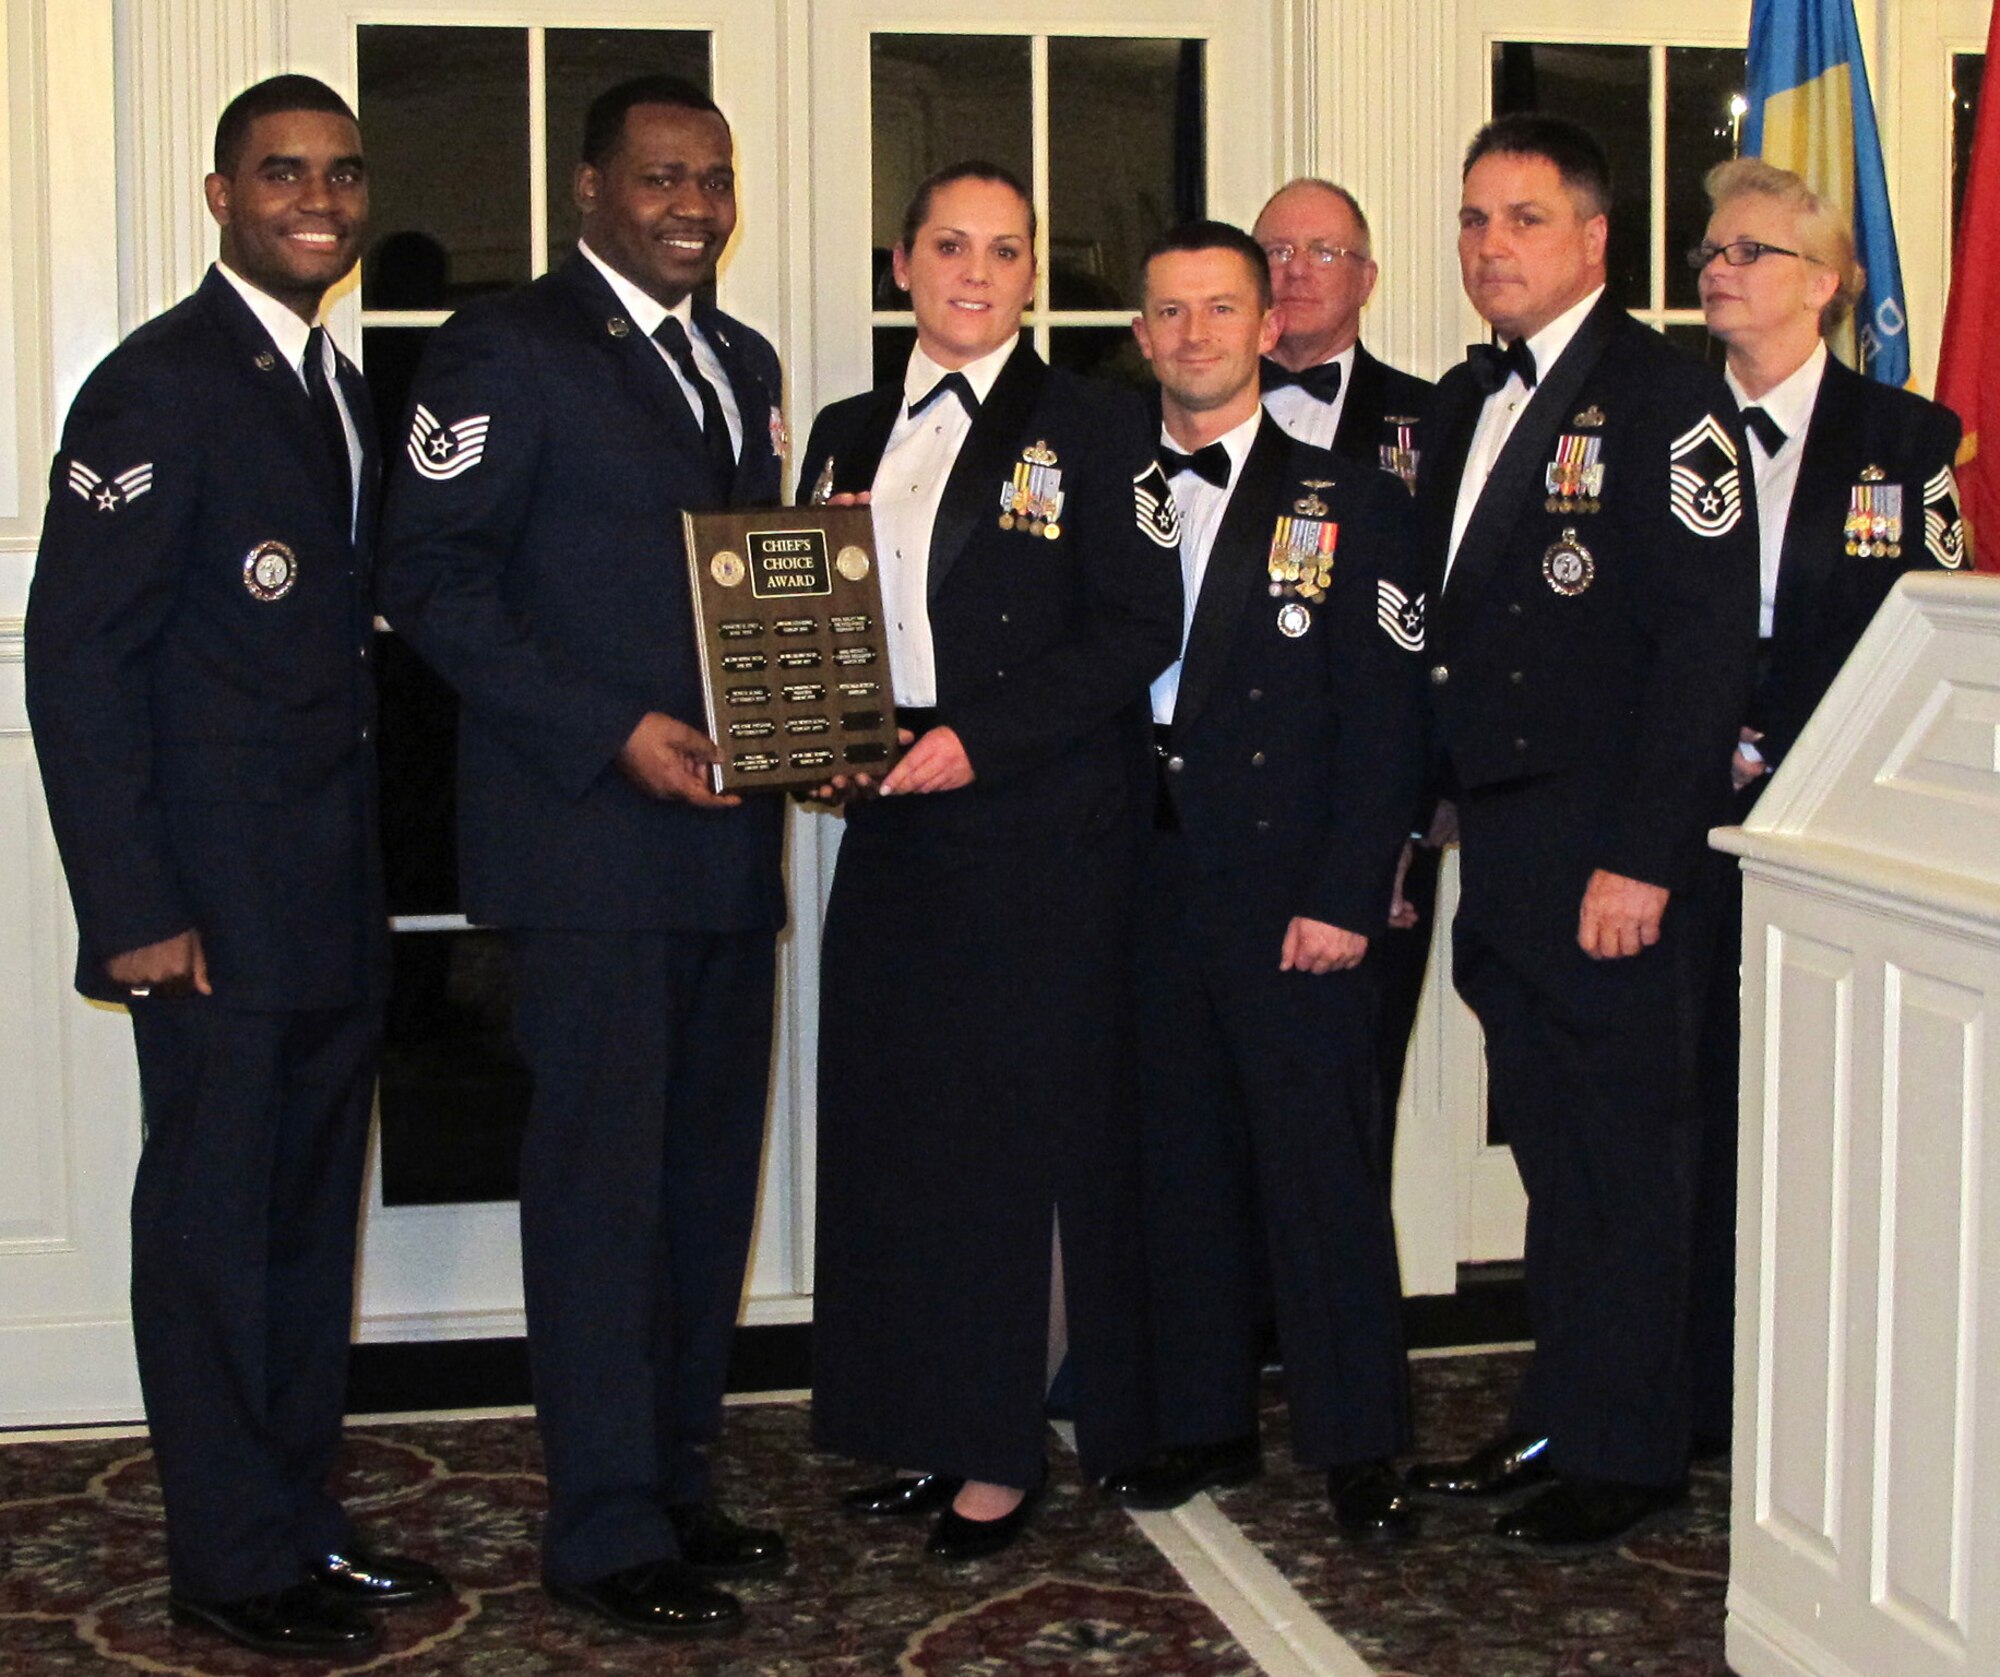 The Delaware Air National Guard recruiting team receives the Chief’s Choice award from the Chief Master Sergeant’s Council during the Delaware ANG Annual Enlisted Recognition Banquet held March 2, 2013 at the Deerfield Golf and Tennis Club in Newark, Del. For FY2012 the Delaware ANG gained 168 people, and finished the year with a retention rate of 91 percent and a re-enlistment rate of 94 percent. Overall end strength rose from 89.5 to 96.4 percent in the fiscal year. Left to right, front: Recruiting team members Senior Airman Desmond Overton, Tech. Sgt. Terrence Parker, Master Sgt. Tanya Harris, Tech. Sgt. Sam Lewis and Senior Master Sgt. Mike Davis. Standing at rear are Chief Master Sergeants Mike Forsyth and Patricia Ottinger. Not present: recruiter Tech. Sgt. Kristin Favors. (Air National Guard photo/Tech. Sgt. Benjamin Matwey)